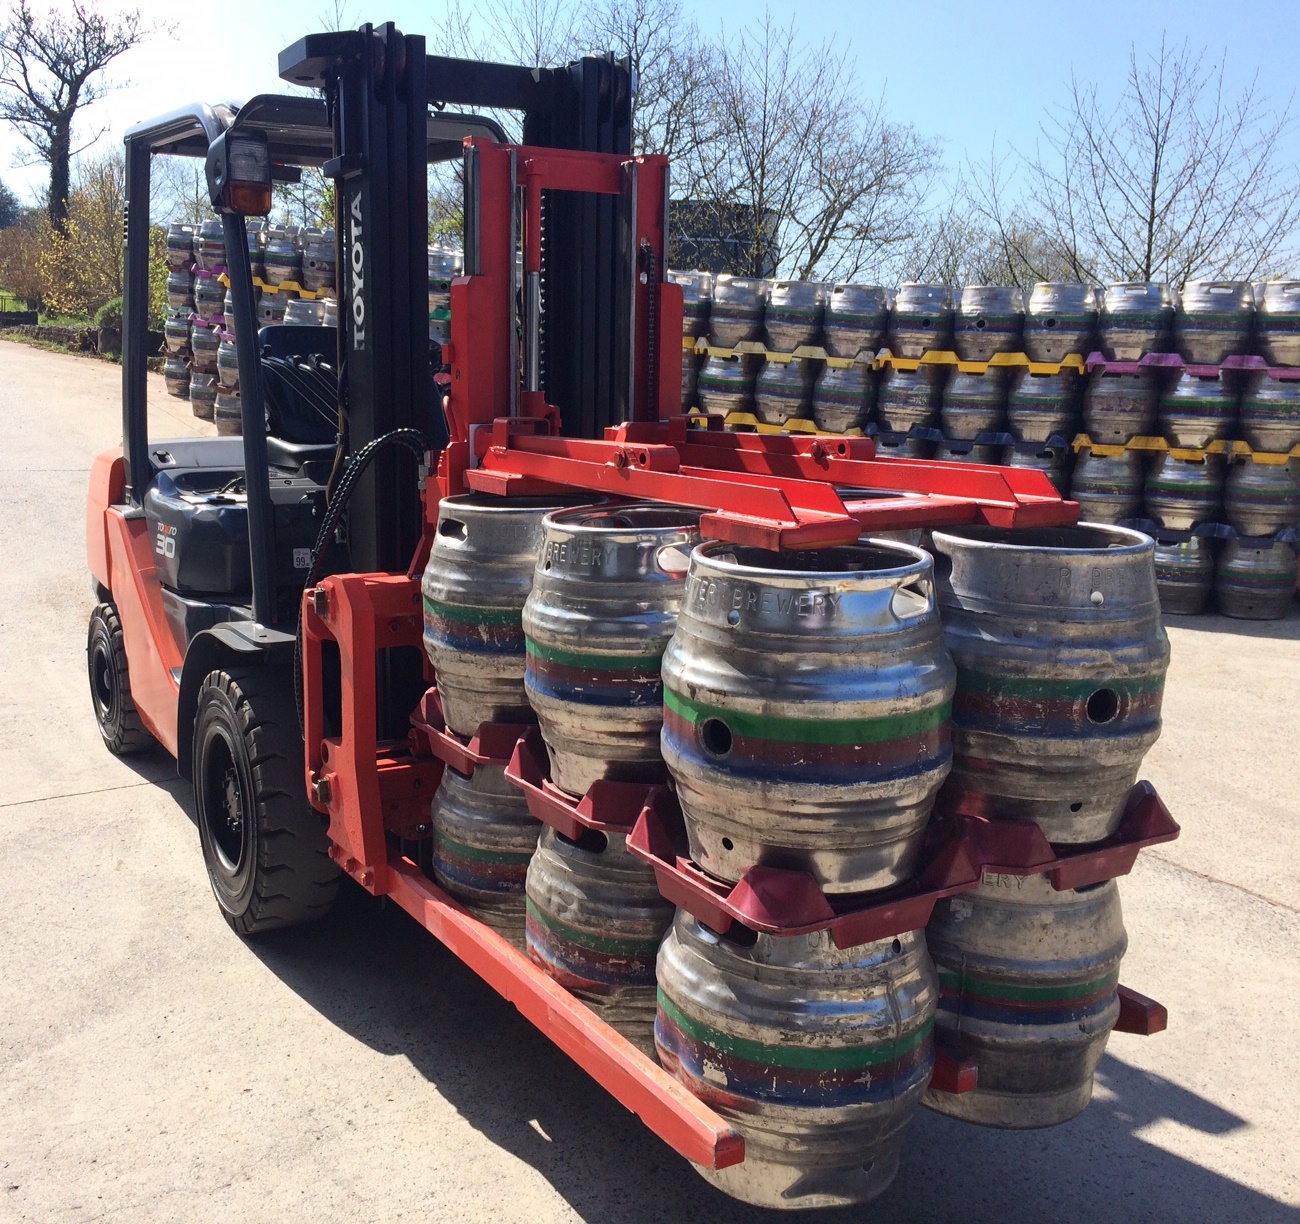 KAUP Customised Keg Clamp Attachment Improves Productivity at Otter Brewery